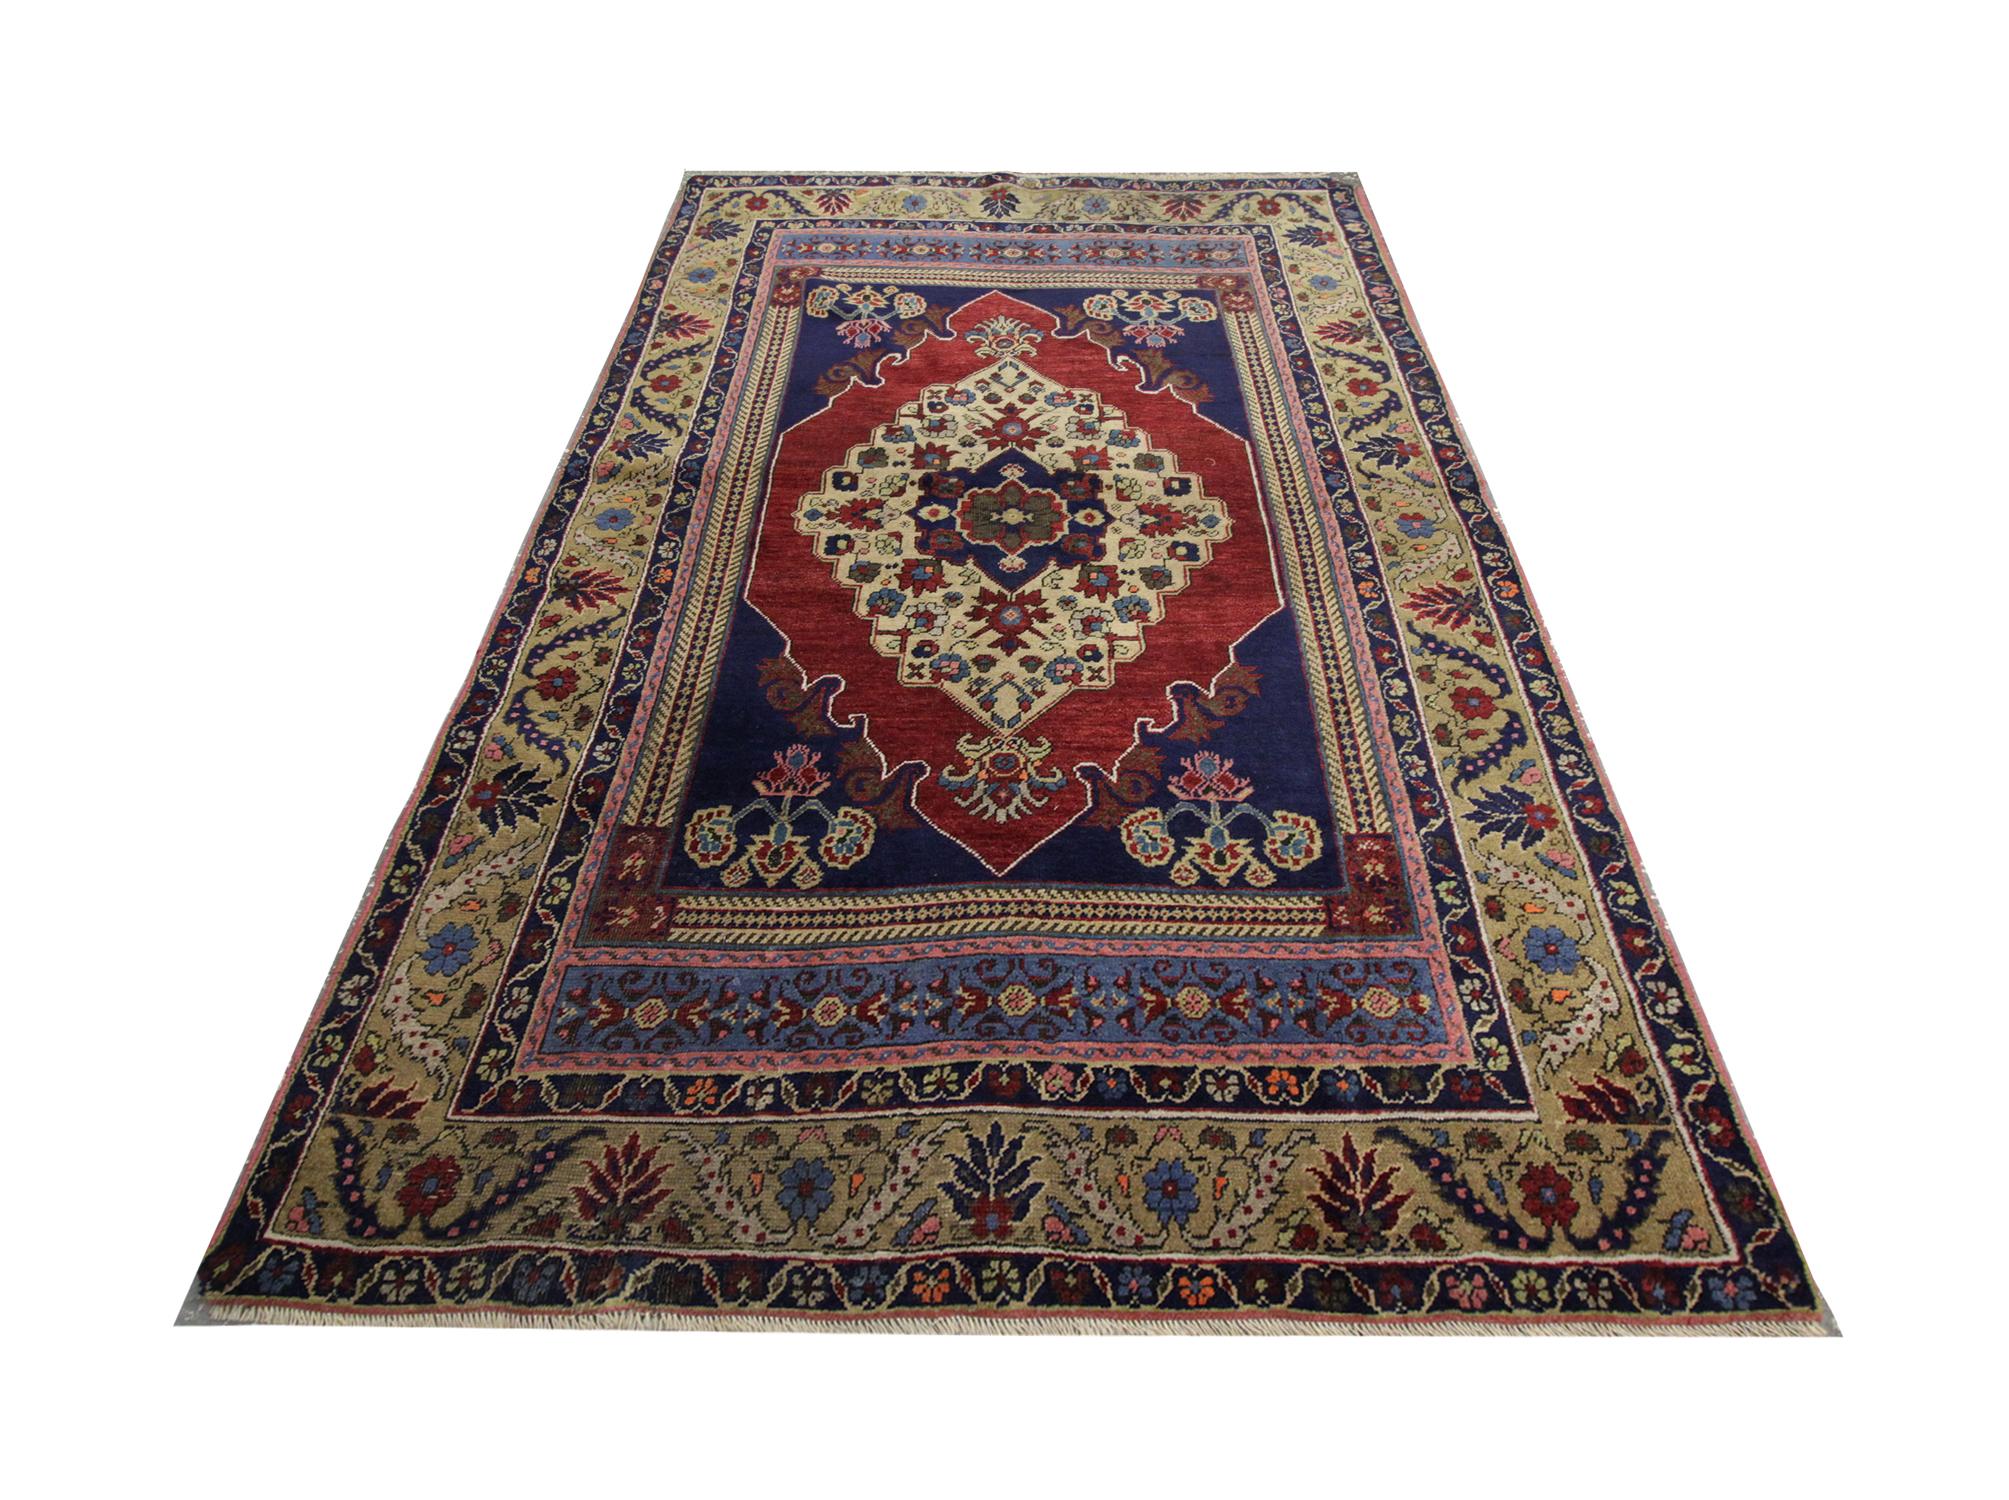 Traditional blue and red colorways have been handwoven into this high-quality antique Turkish rug, with a highly detailed central medallion design- handwoven in 1930 with hand-spun, vegetable-dyed wool, and cotton, by some of the finest artisans.